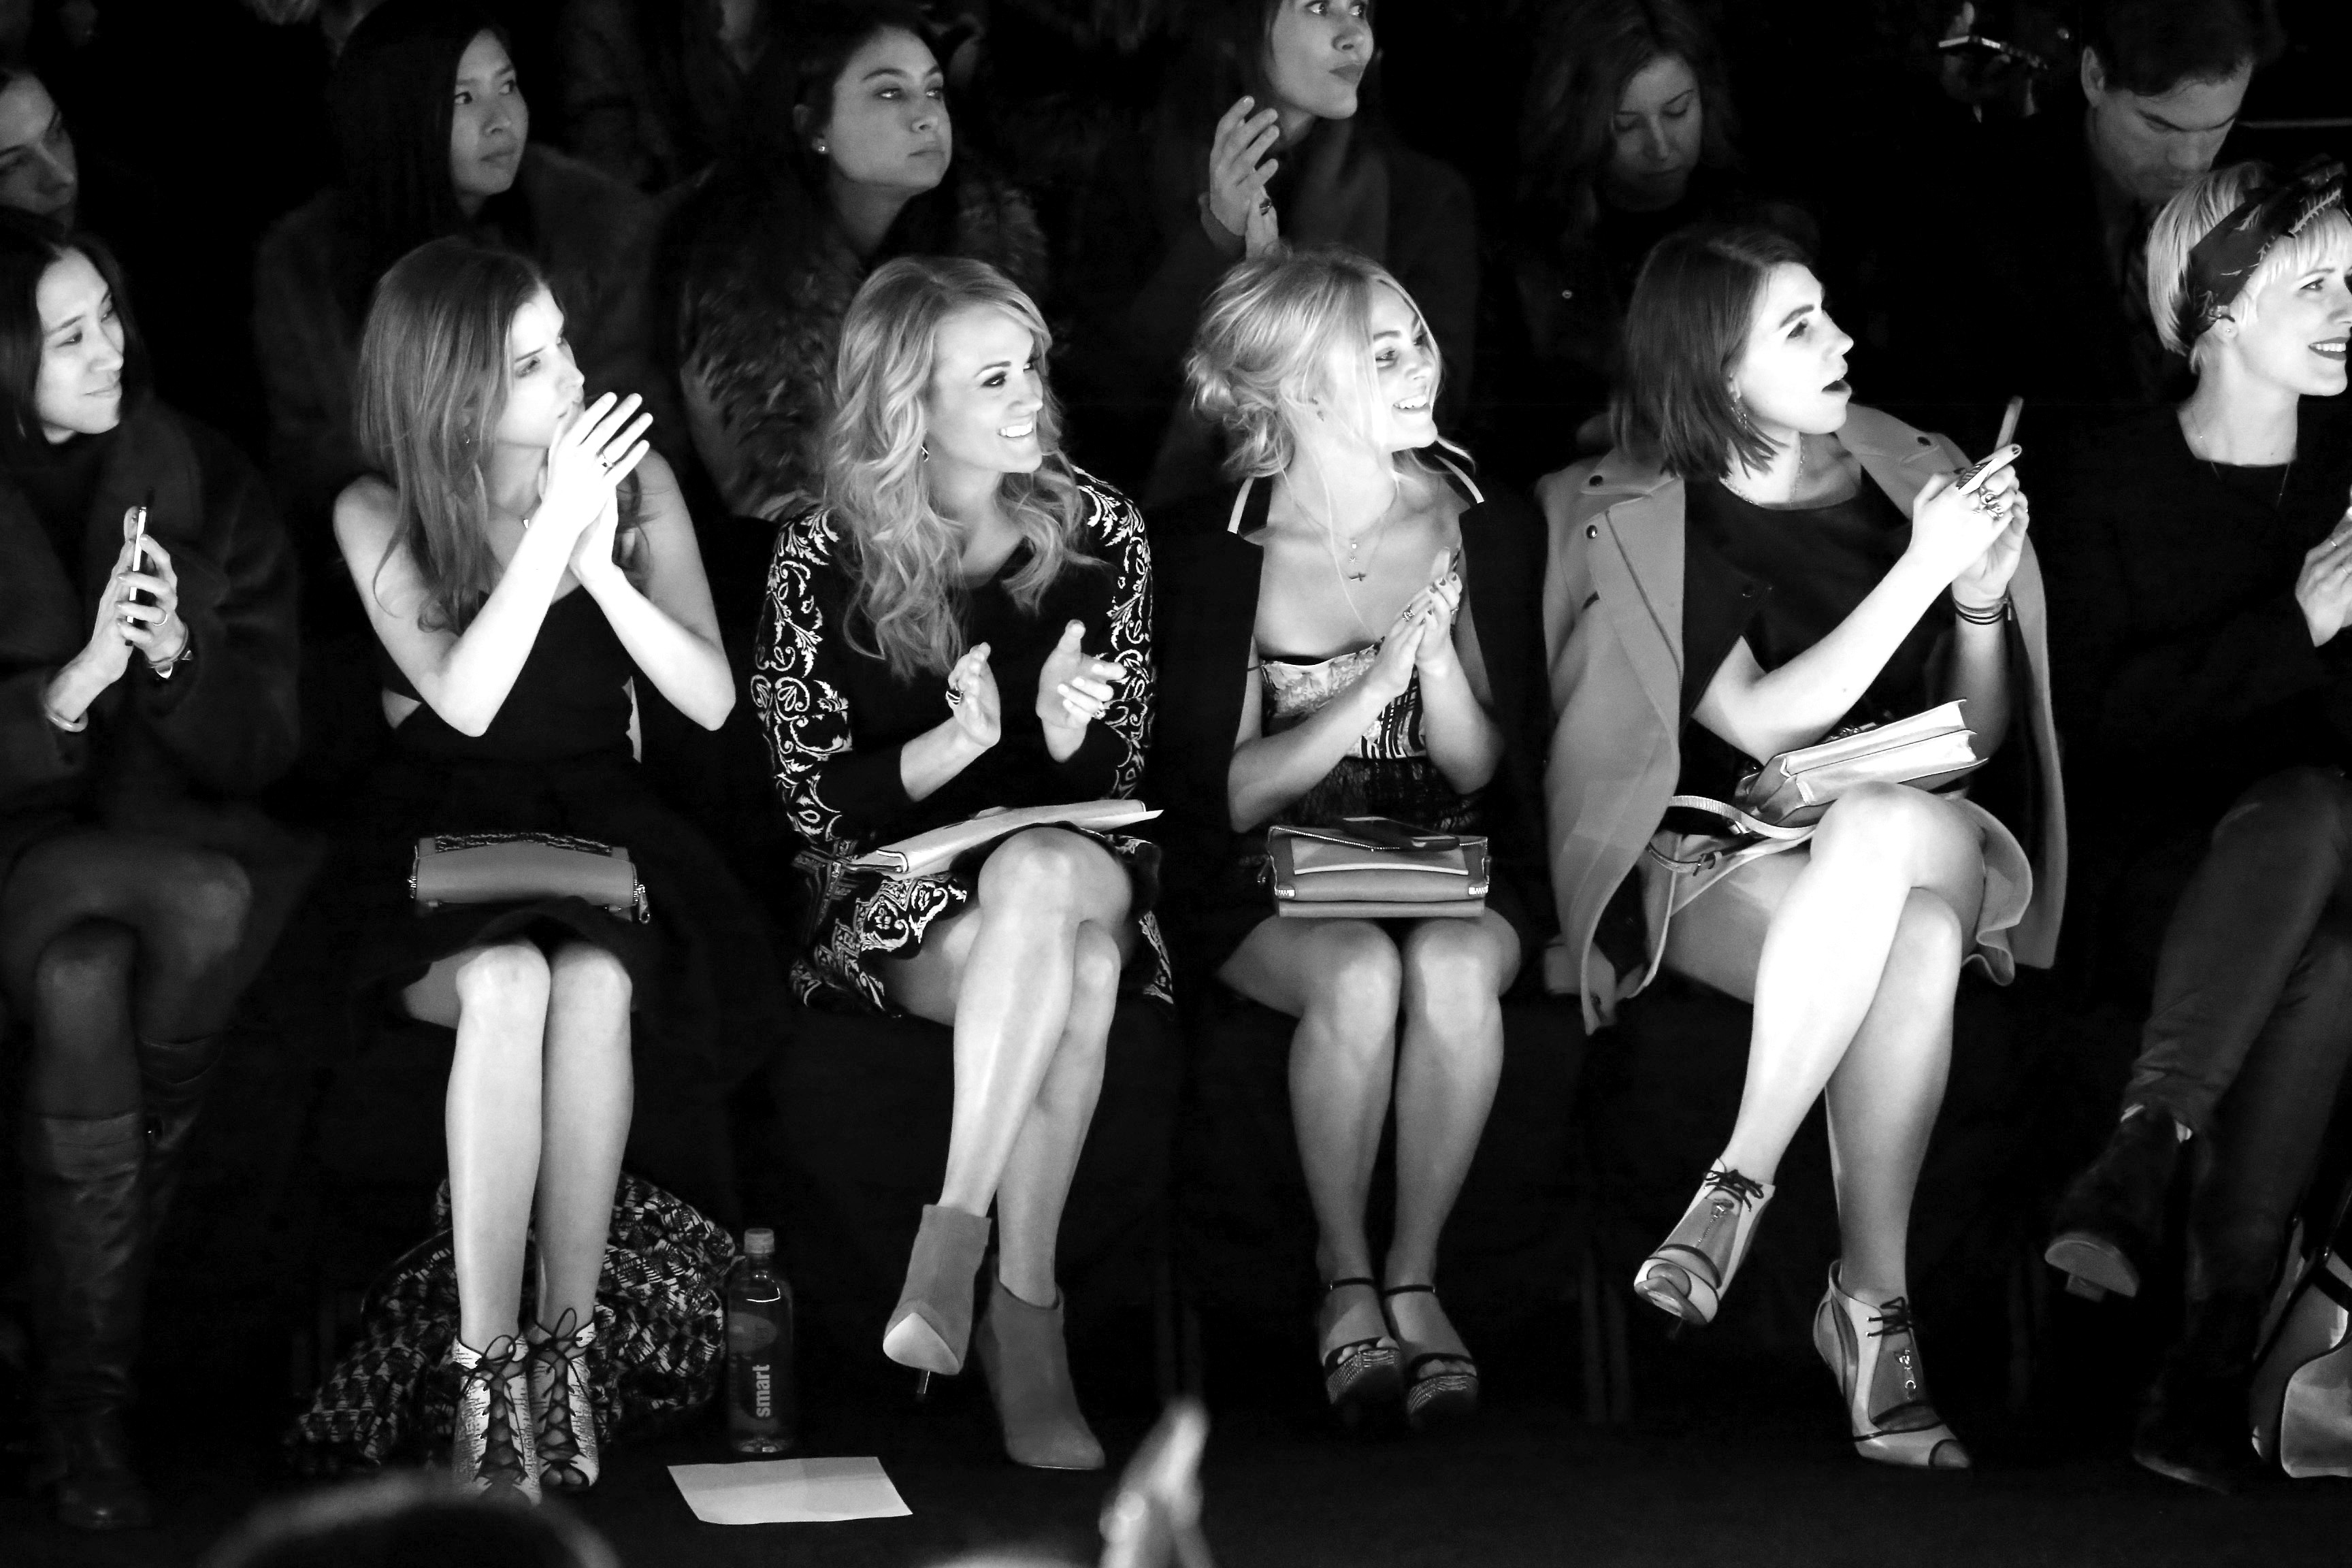 NEW YORK, NY - FEBRUARY 07:(L-R) Actress Anna Kendrick, singer Carrie Underwood, actress AnnaSophia Robb and actress Zosia Mamet attend TRESemme at Rebecca Minkoff fashion show during Mercede